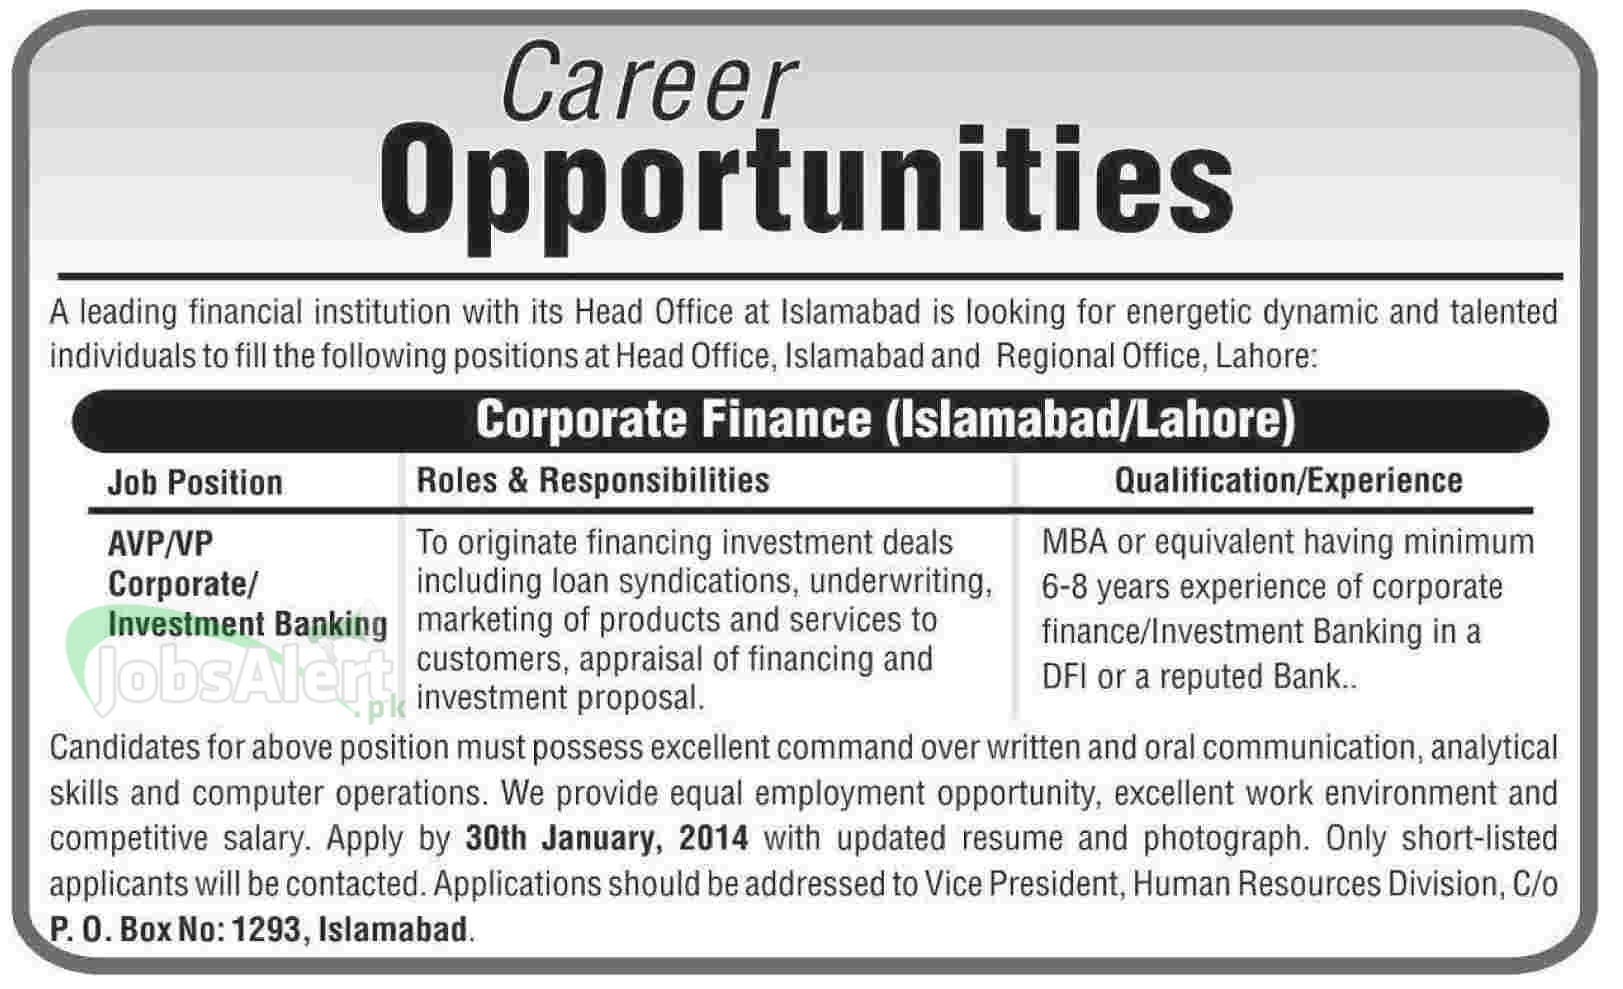 Jobs in Corporate Finance Islamabad & Lahore